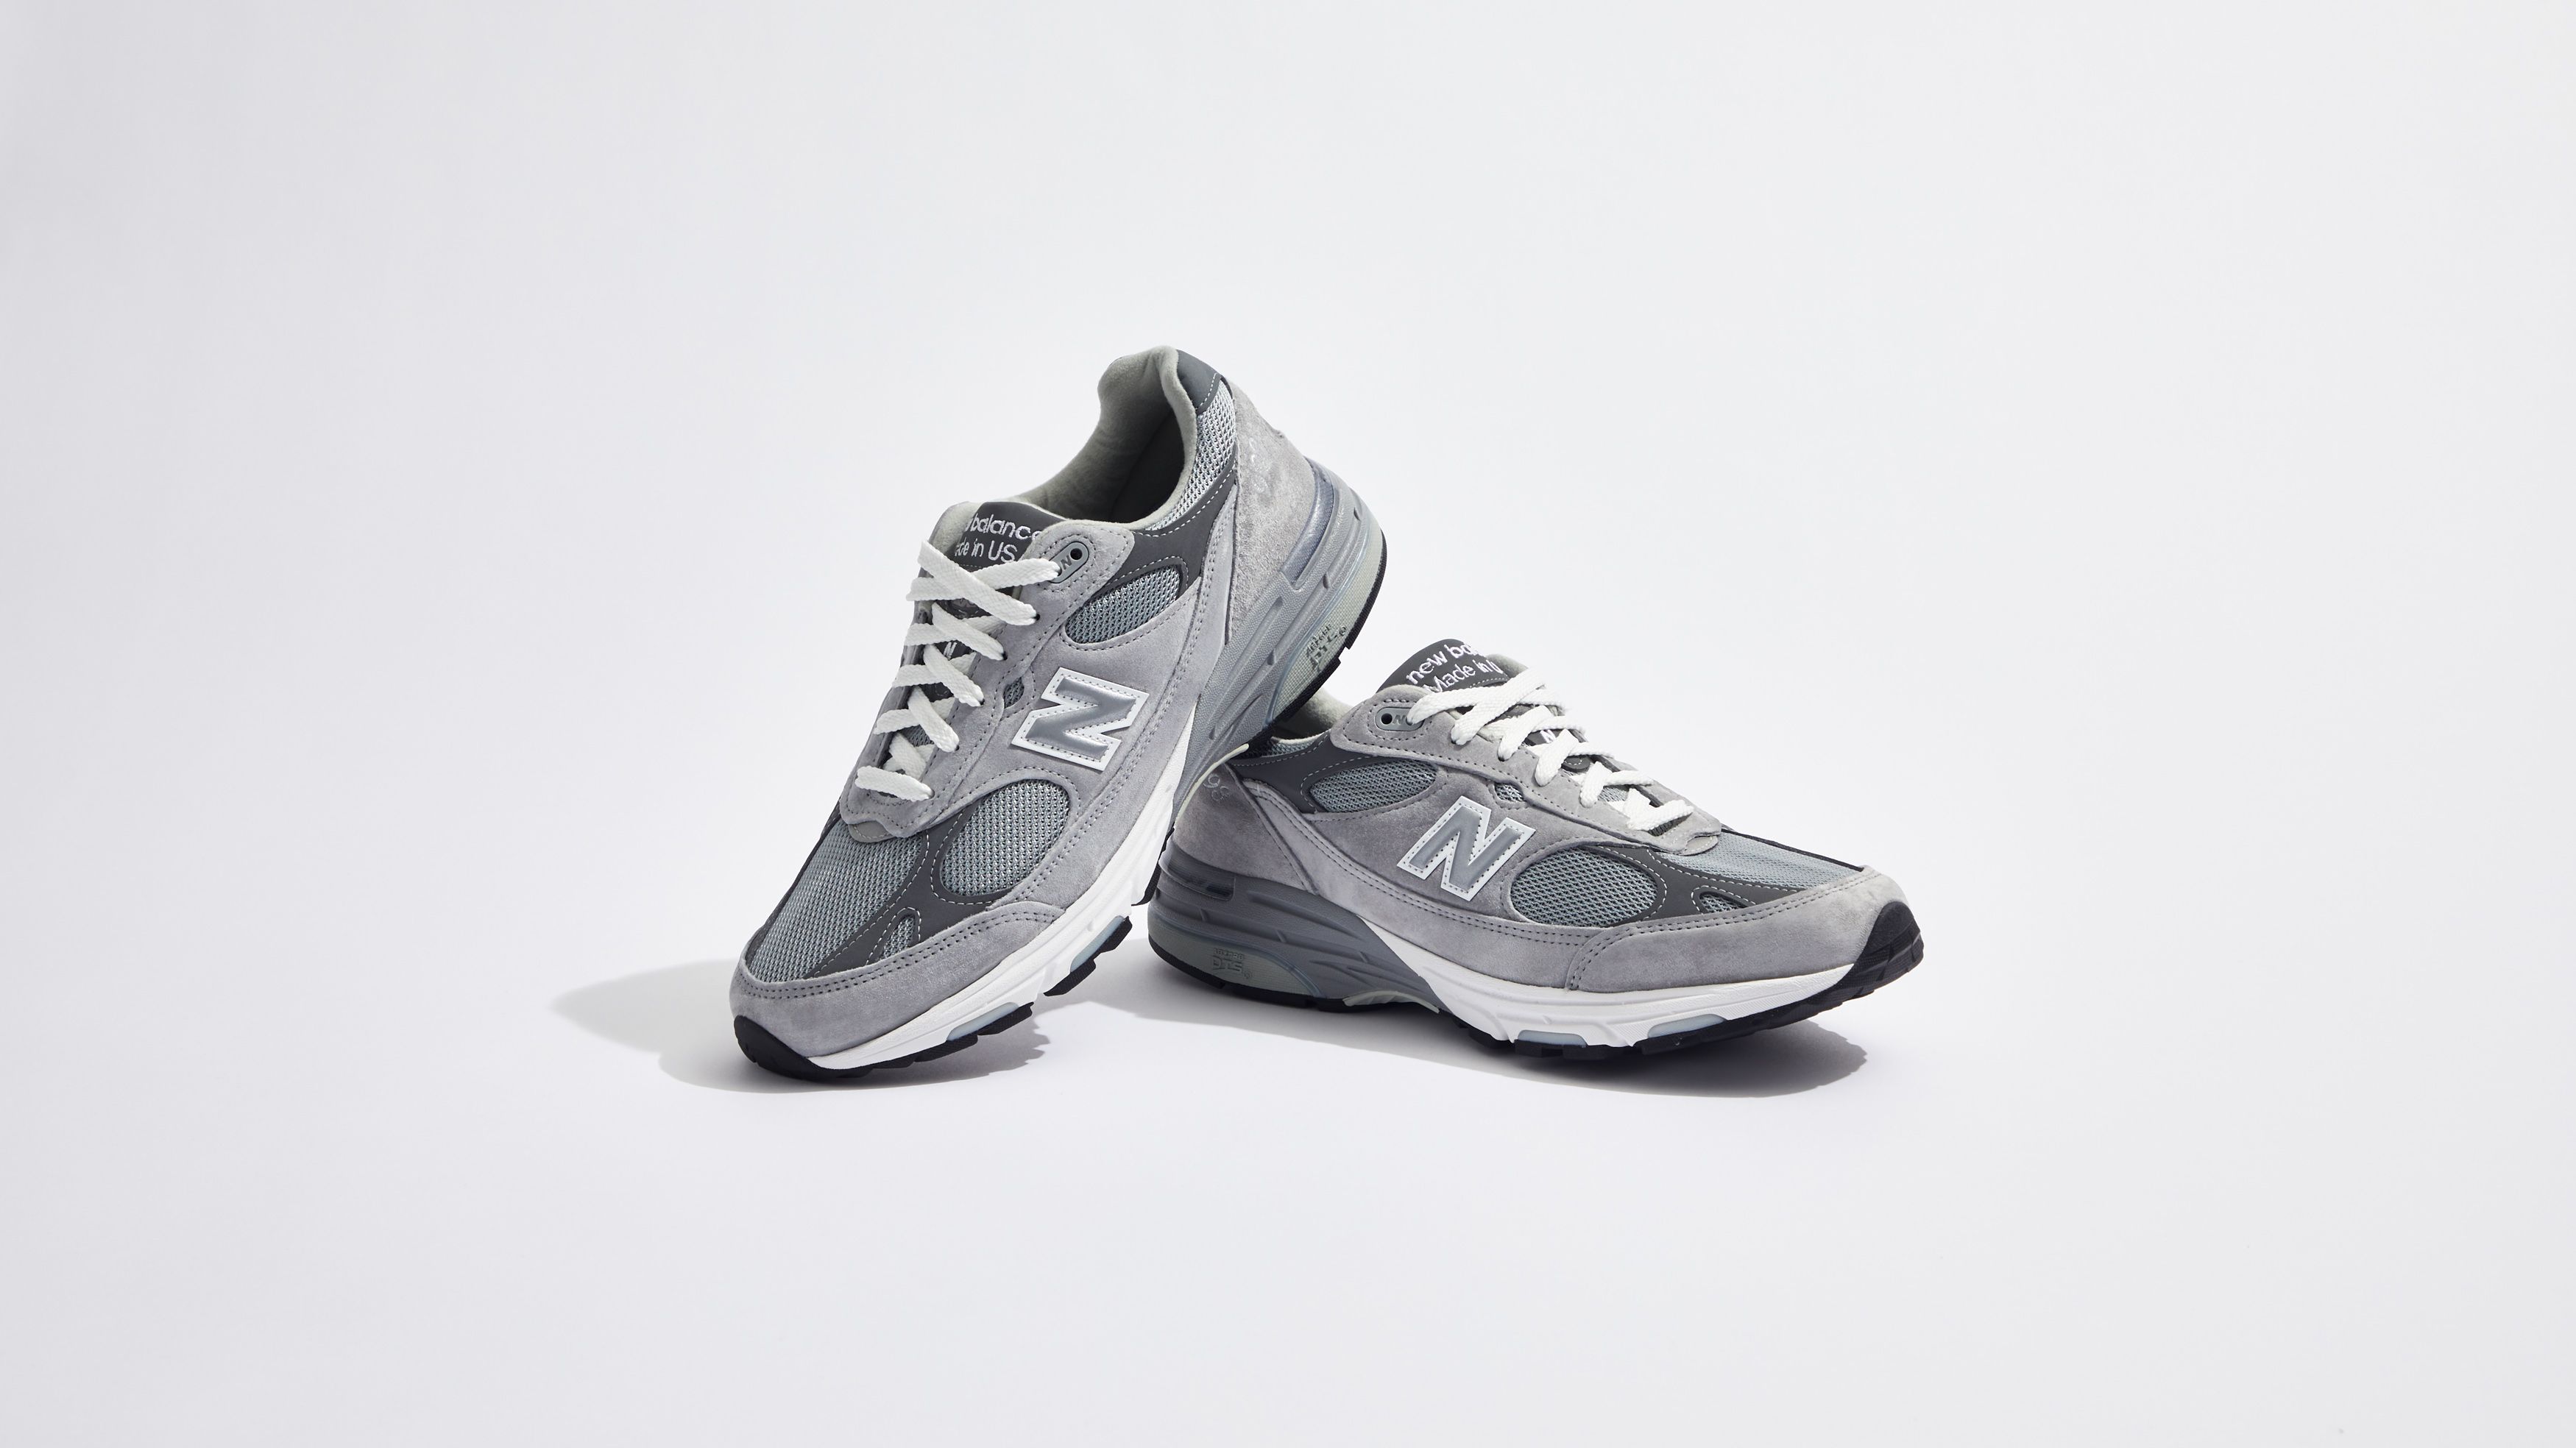 New Balance x J.Crew 992 'NY' New York Sneakers Release Date 